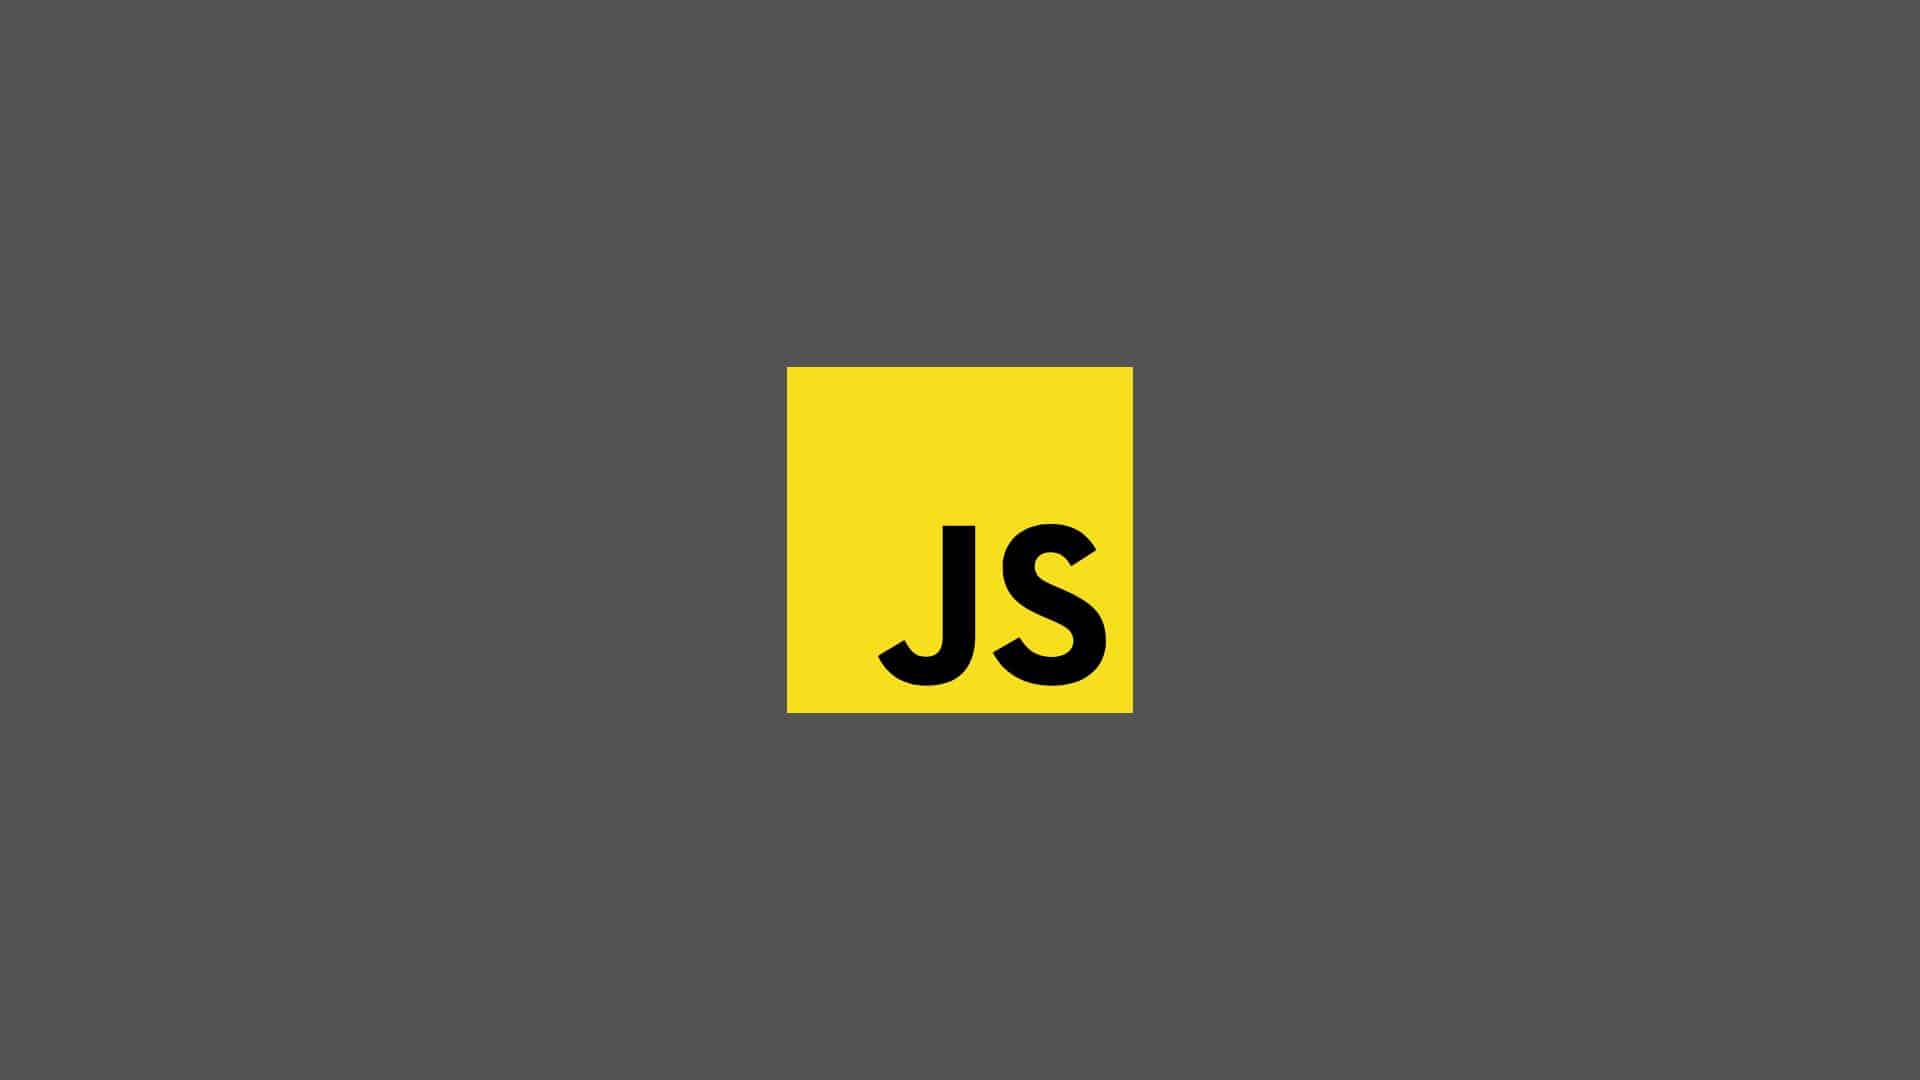 Why should you learn JavaScript?